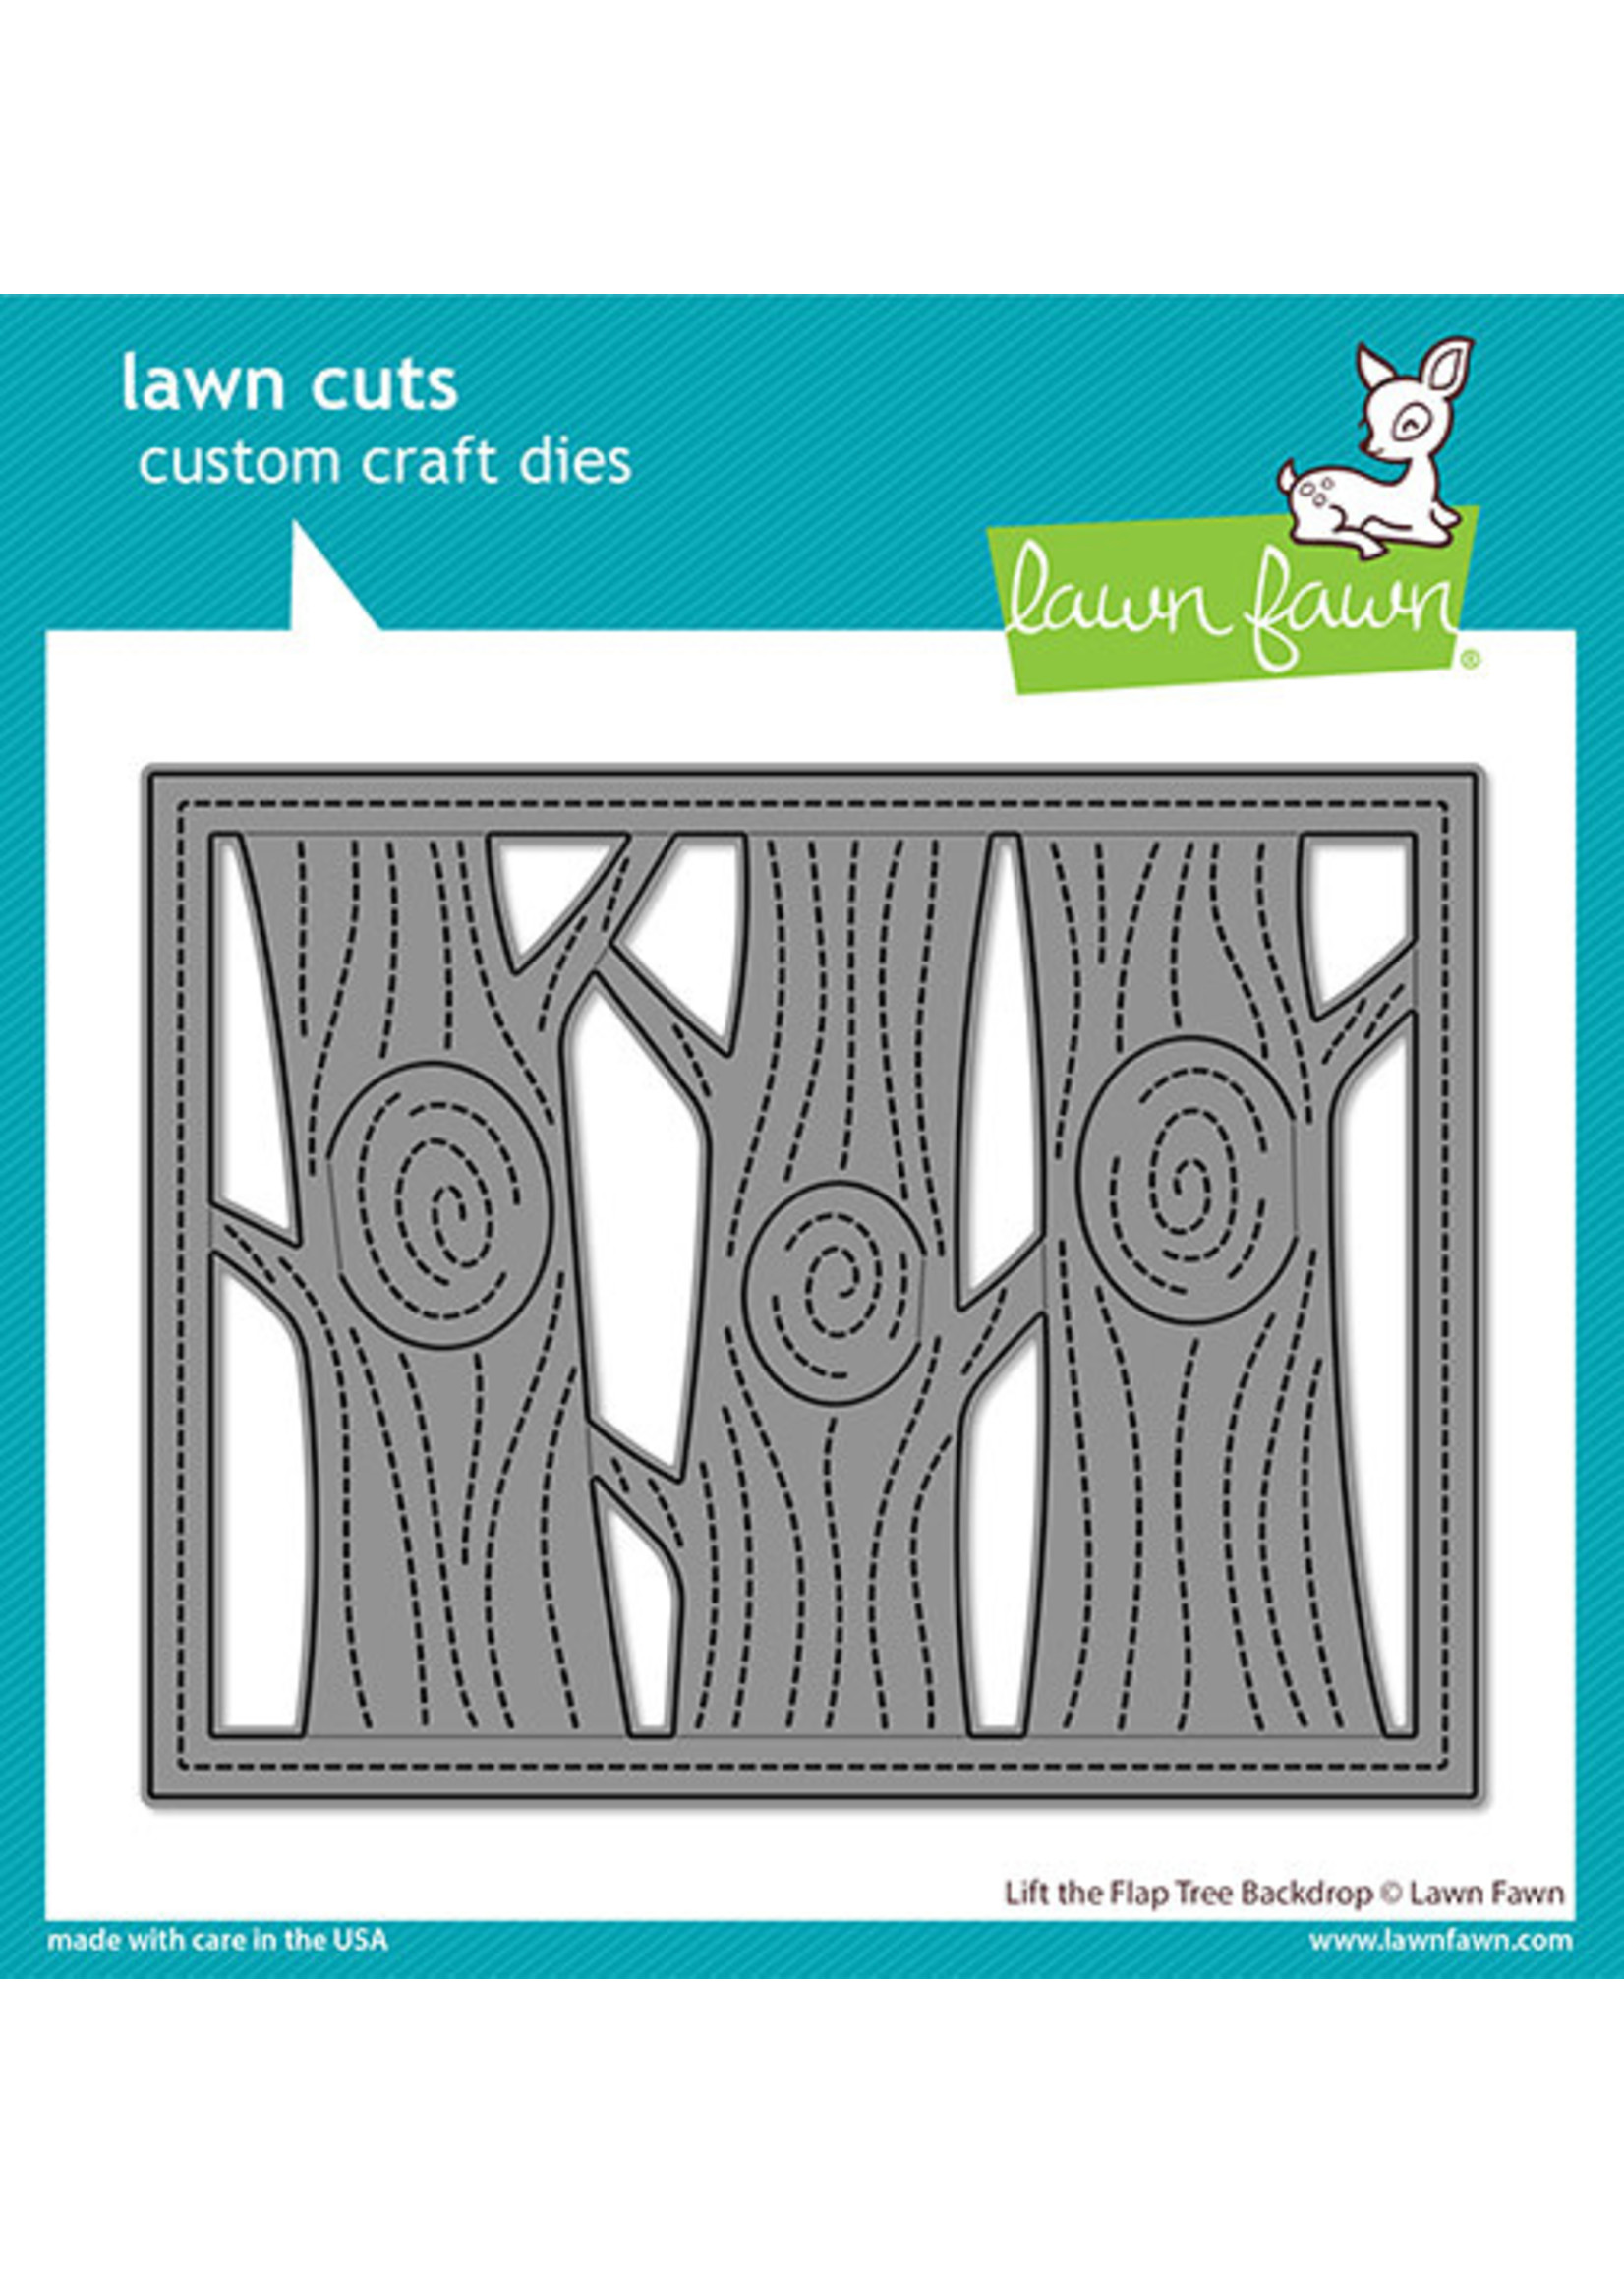 Lawn Fawn lift the flap tree backdrop die